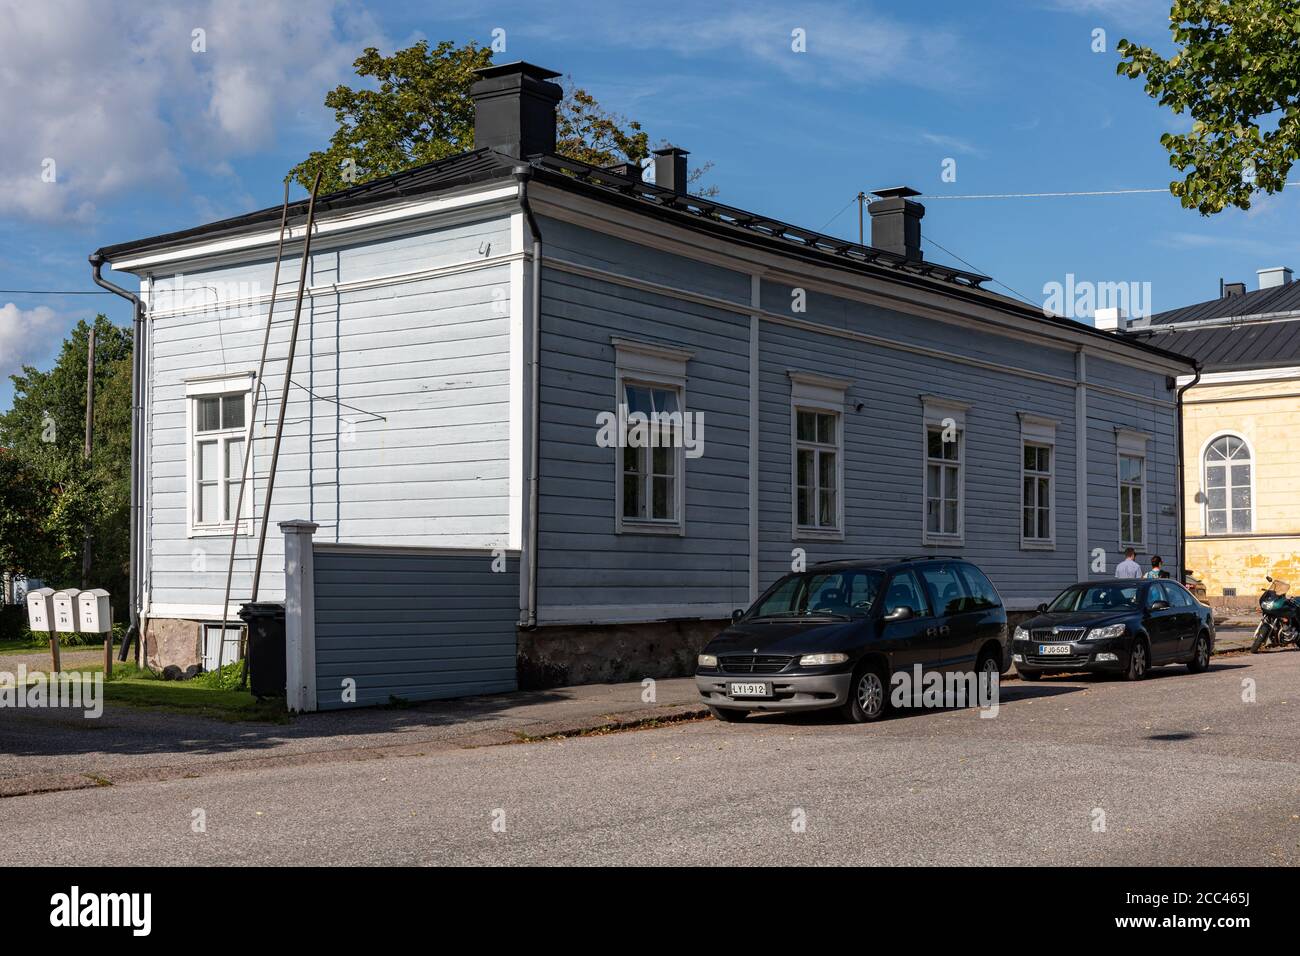 Residential wooden building in Porvoo, Finland Stock Photo